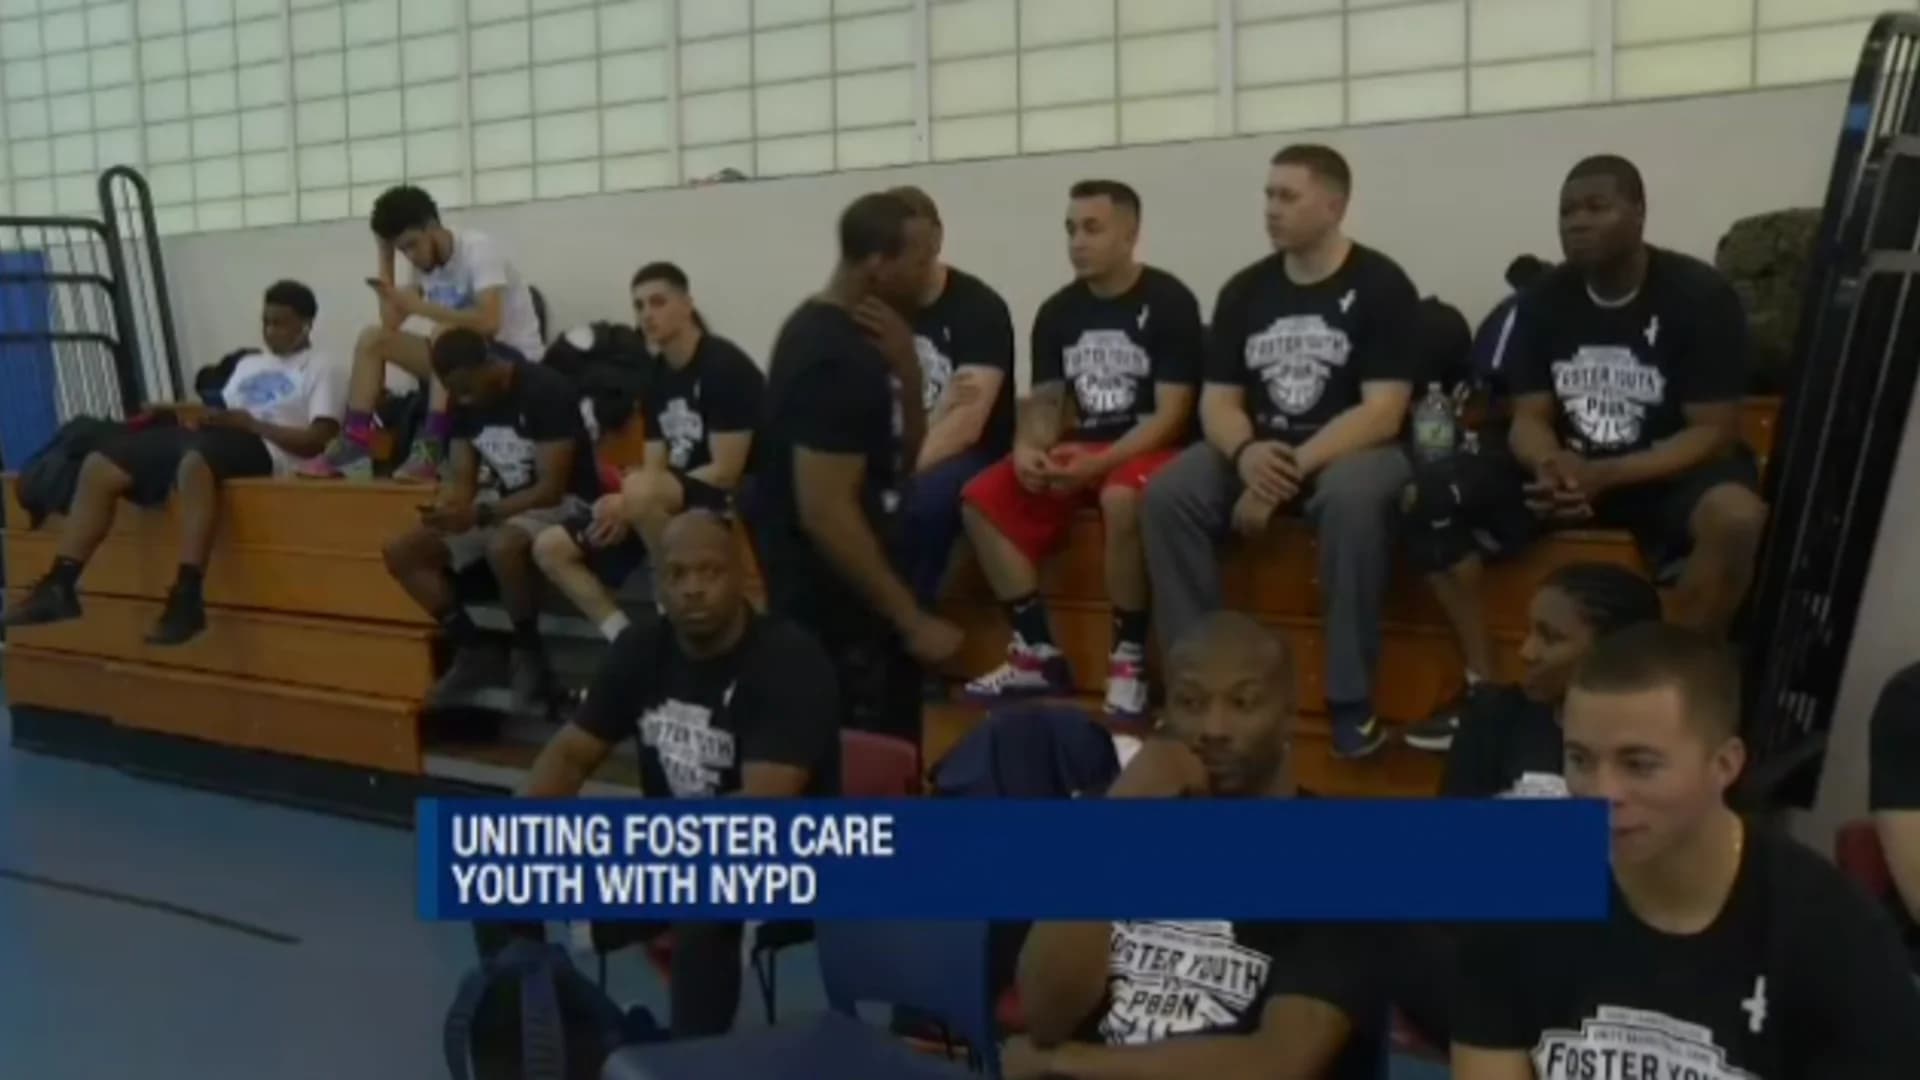 Basketball game unites youth in foster care with NYPD